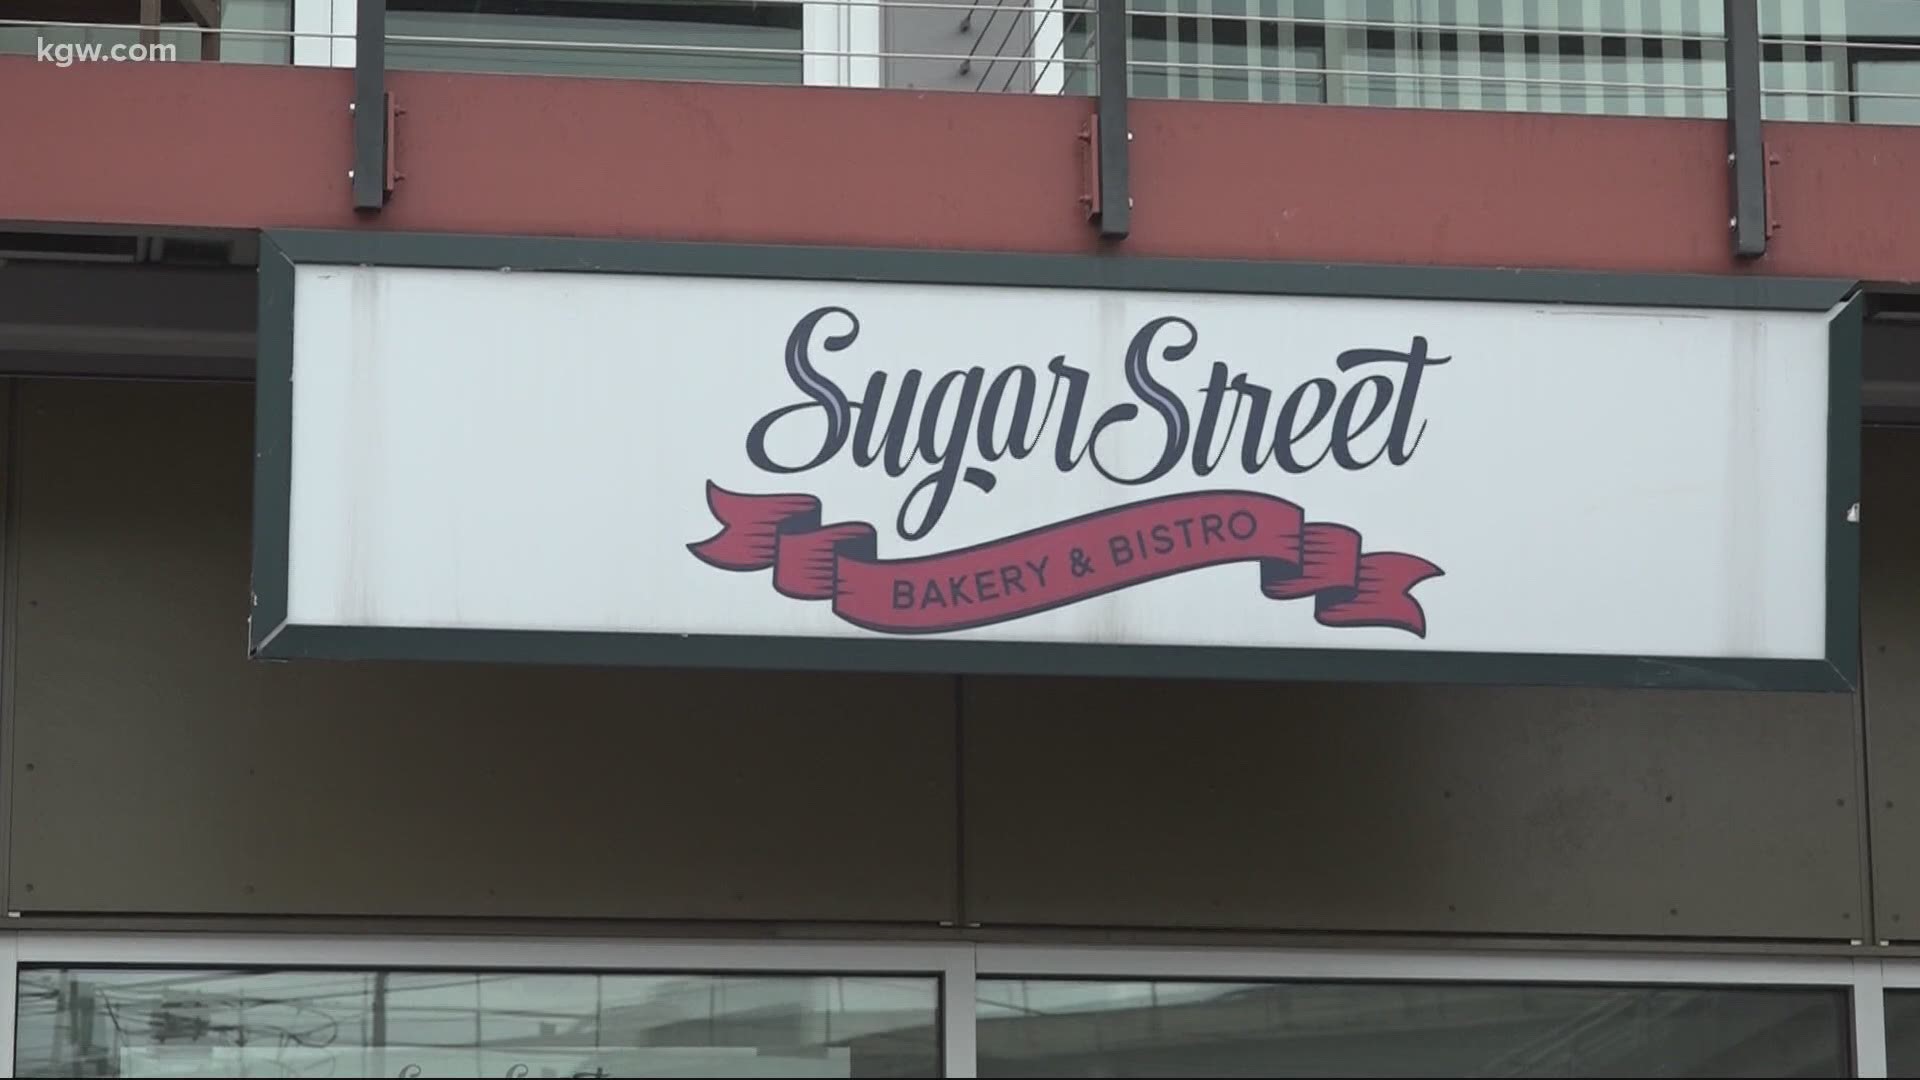 Sugar Street Bakery & Bistro started offering free lunches for kids in March when schools closed and decided to expand the offer to families.